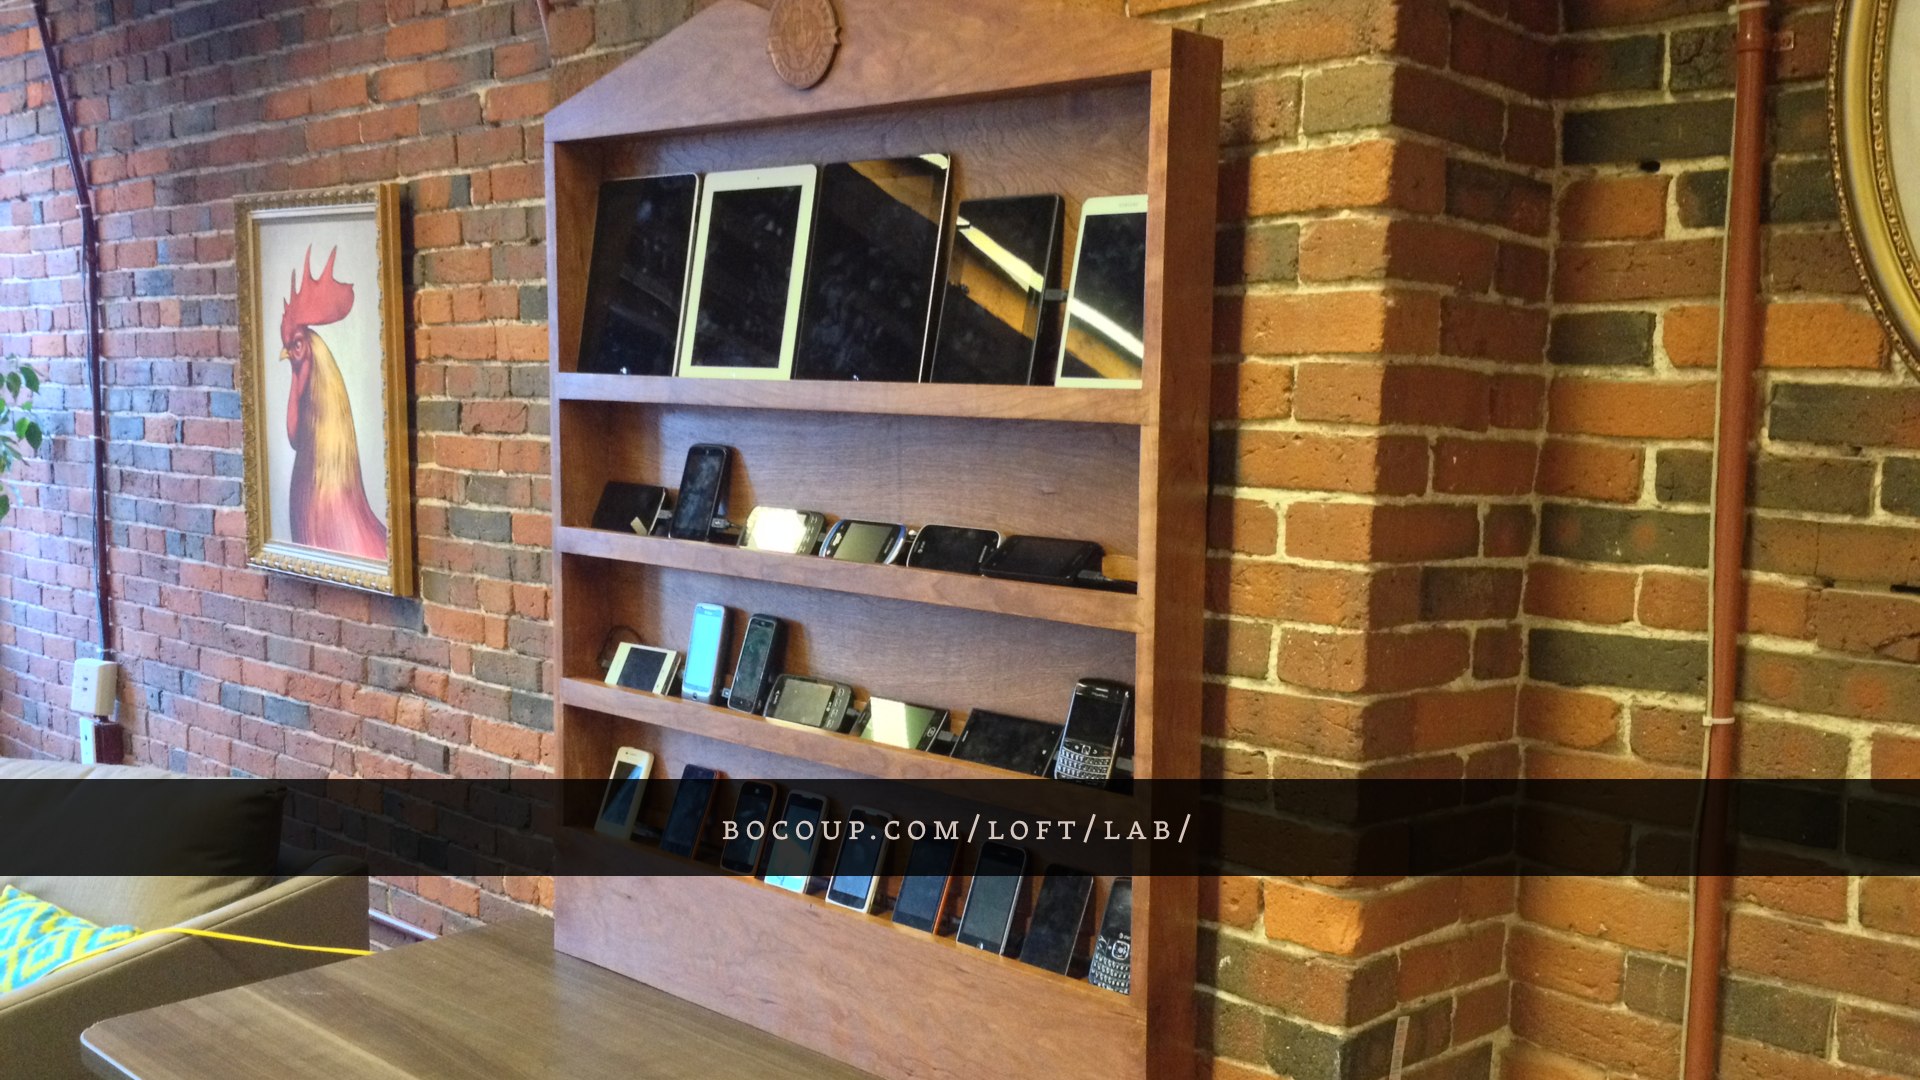 The Bocoup Open Device Lab, a hand-made hardwood shelving unit full of mobile phones and tablets